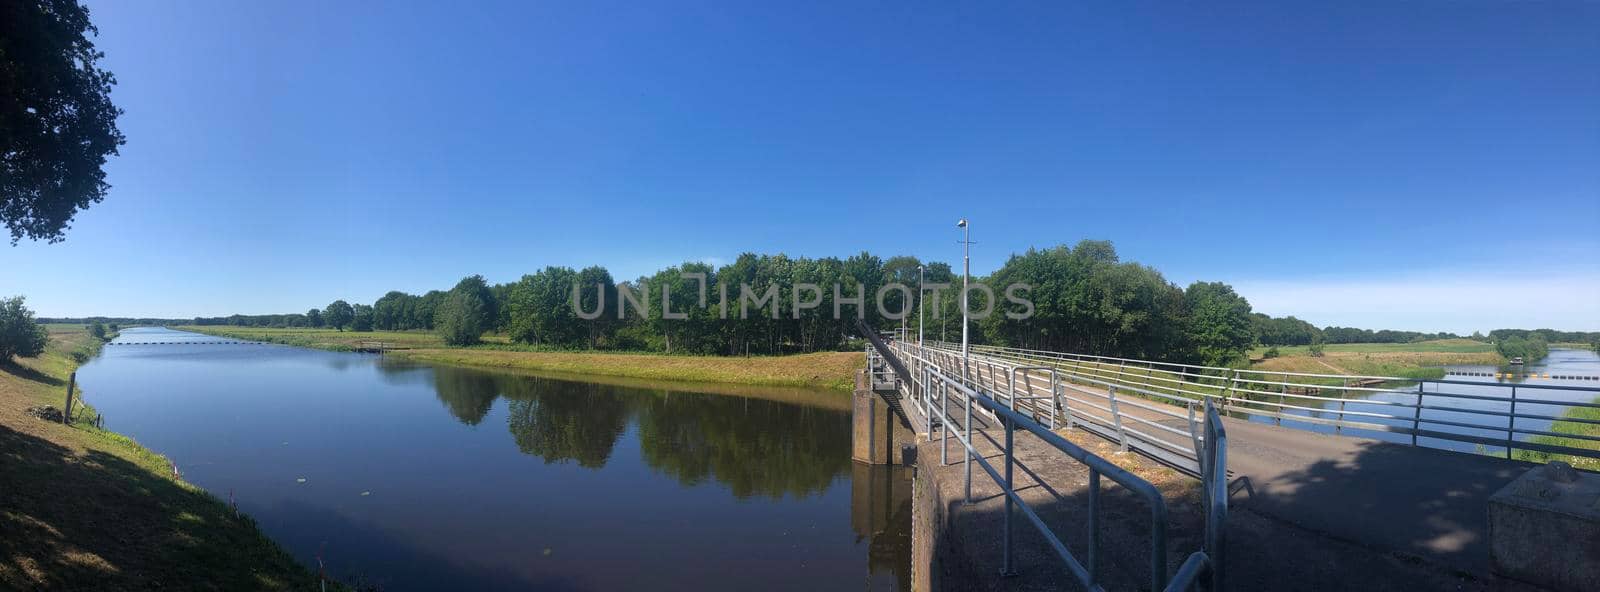 Panorama from a bridge over the river Vecht in Junne, Overijssel The Netherlands